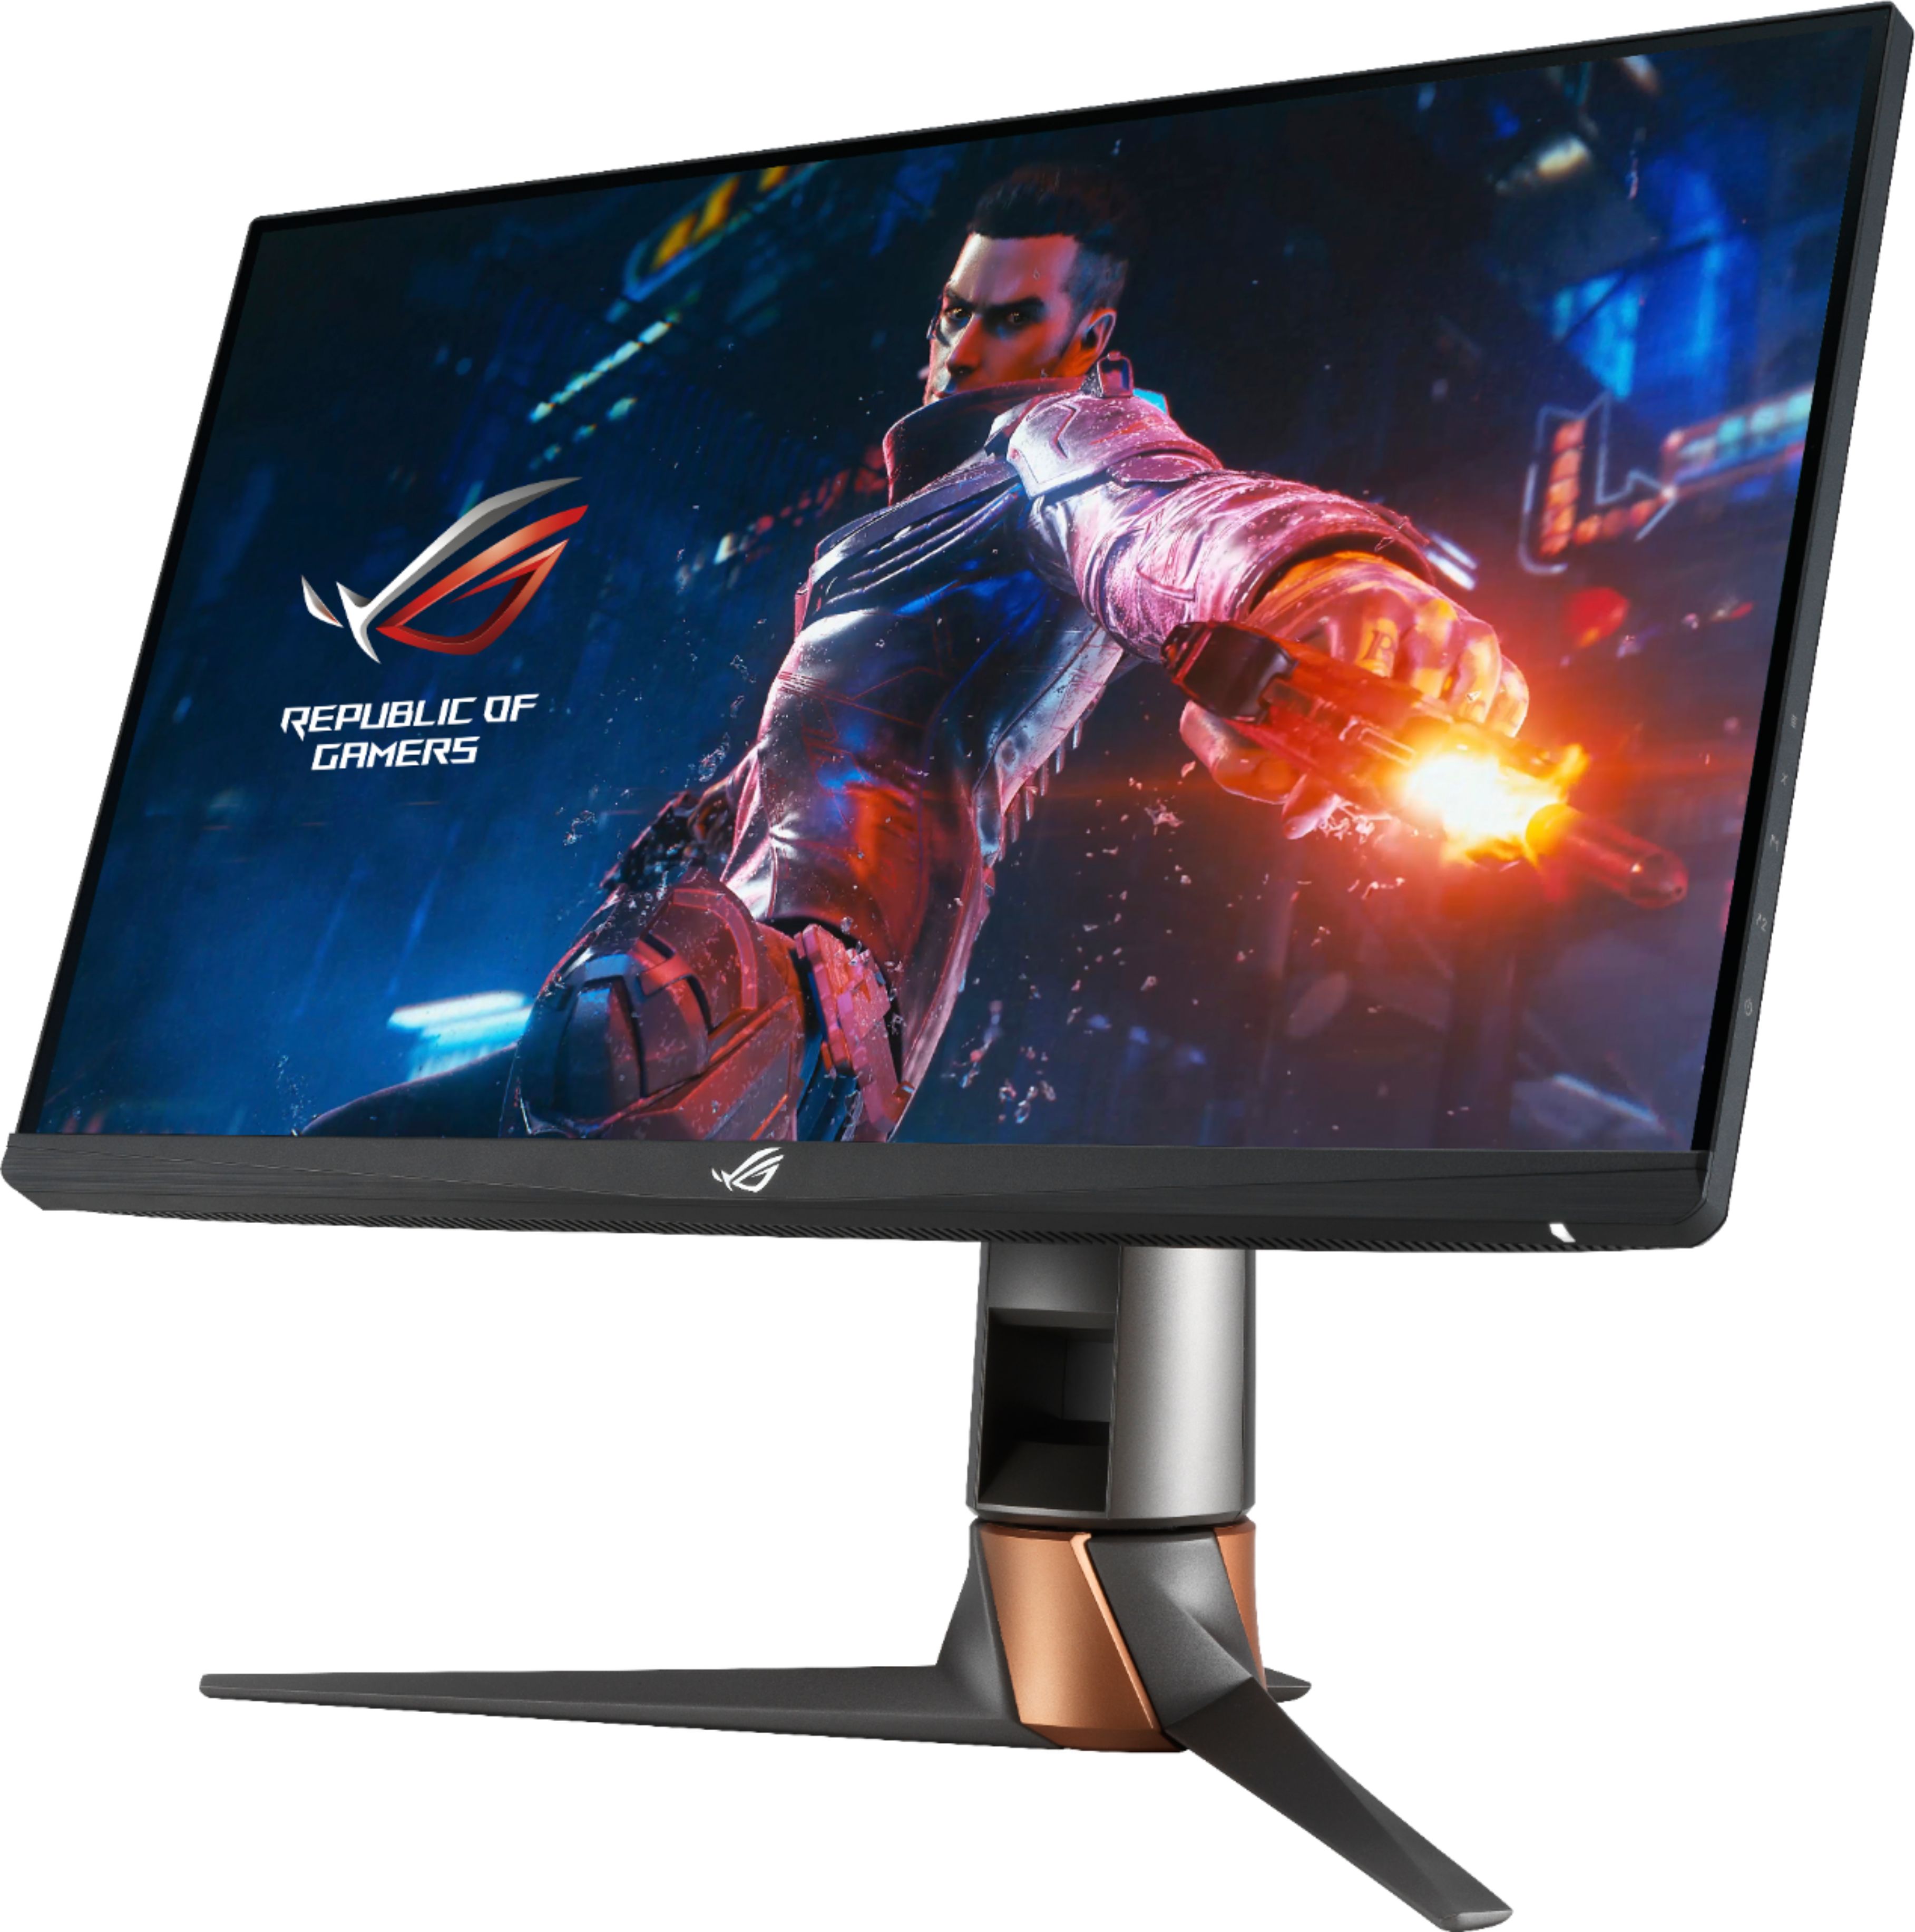 Angle View: CORSAIR - XENEON 32QHD165 32” IPS LED QHD FreeSync Premium Monitor and G-Sync Compatible with HDR400 165Hz (DP, HDMI, and USB-C) - Black